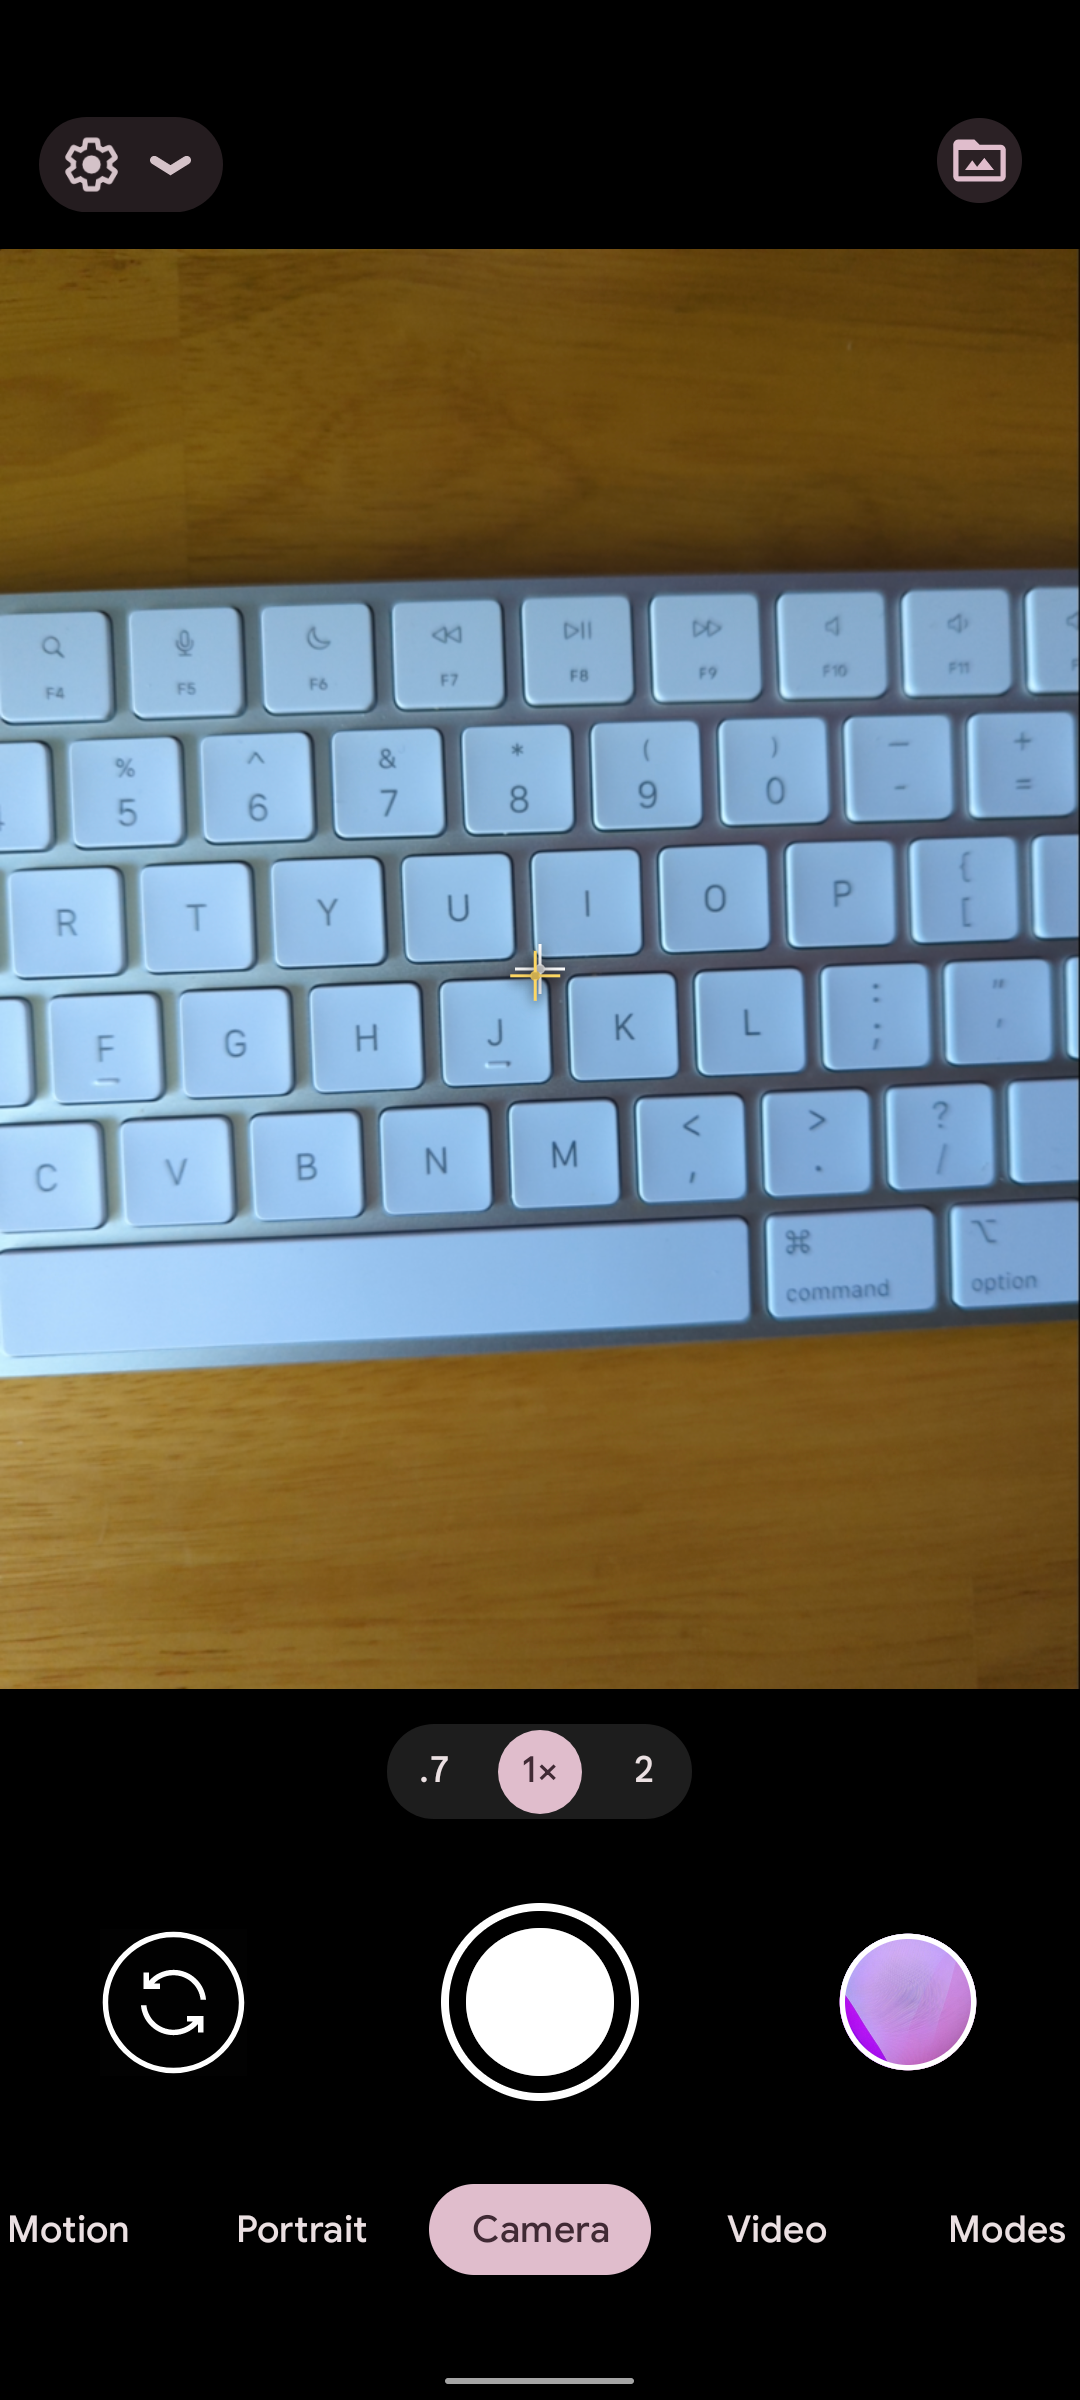 A screenshot of a keyboard visible in the Pixel camera's viewfinder.